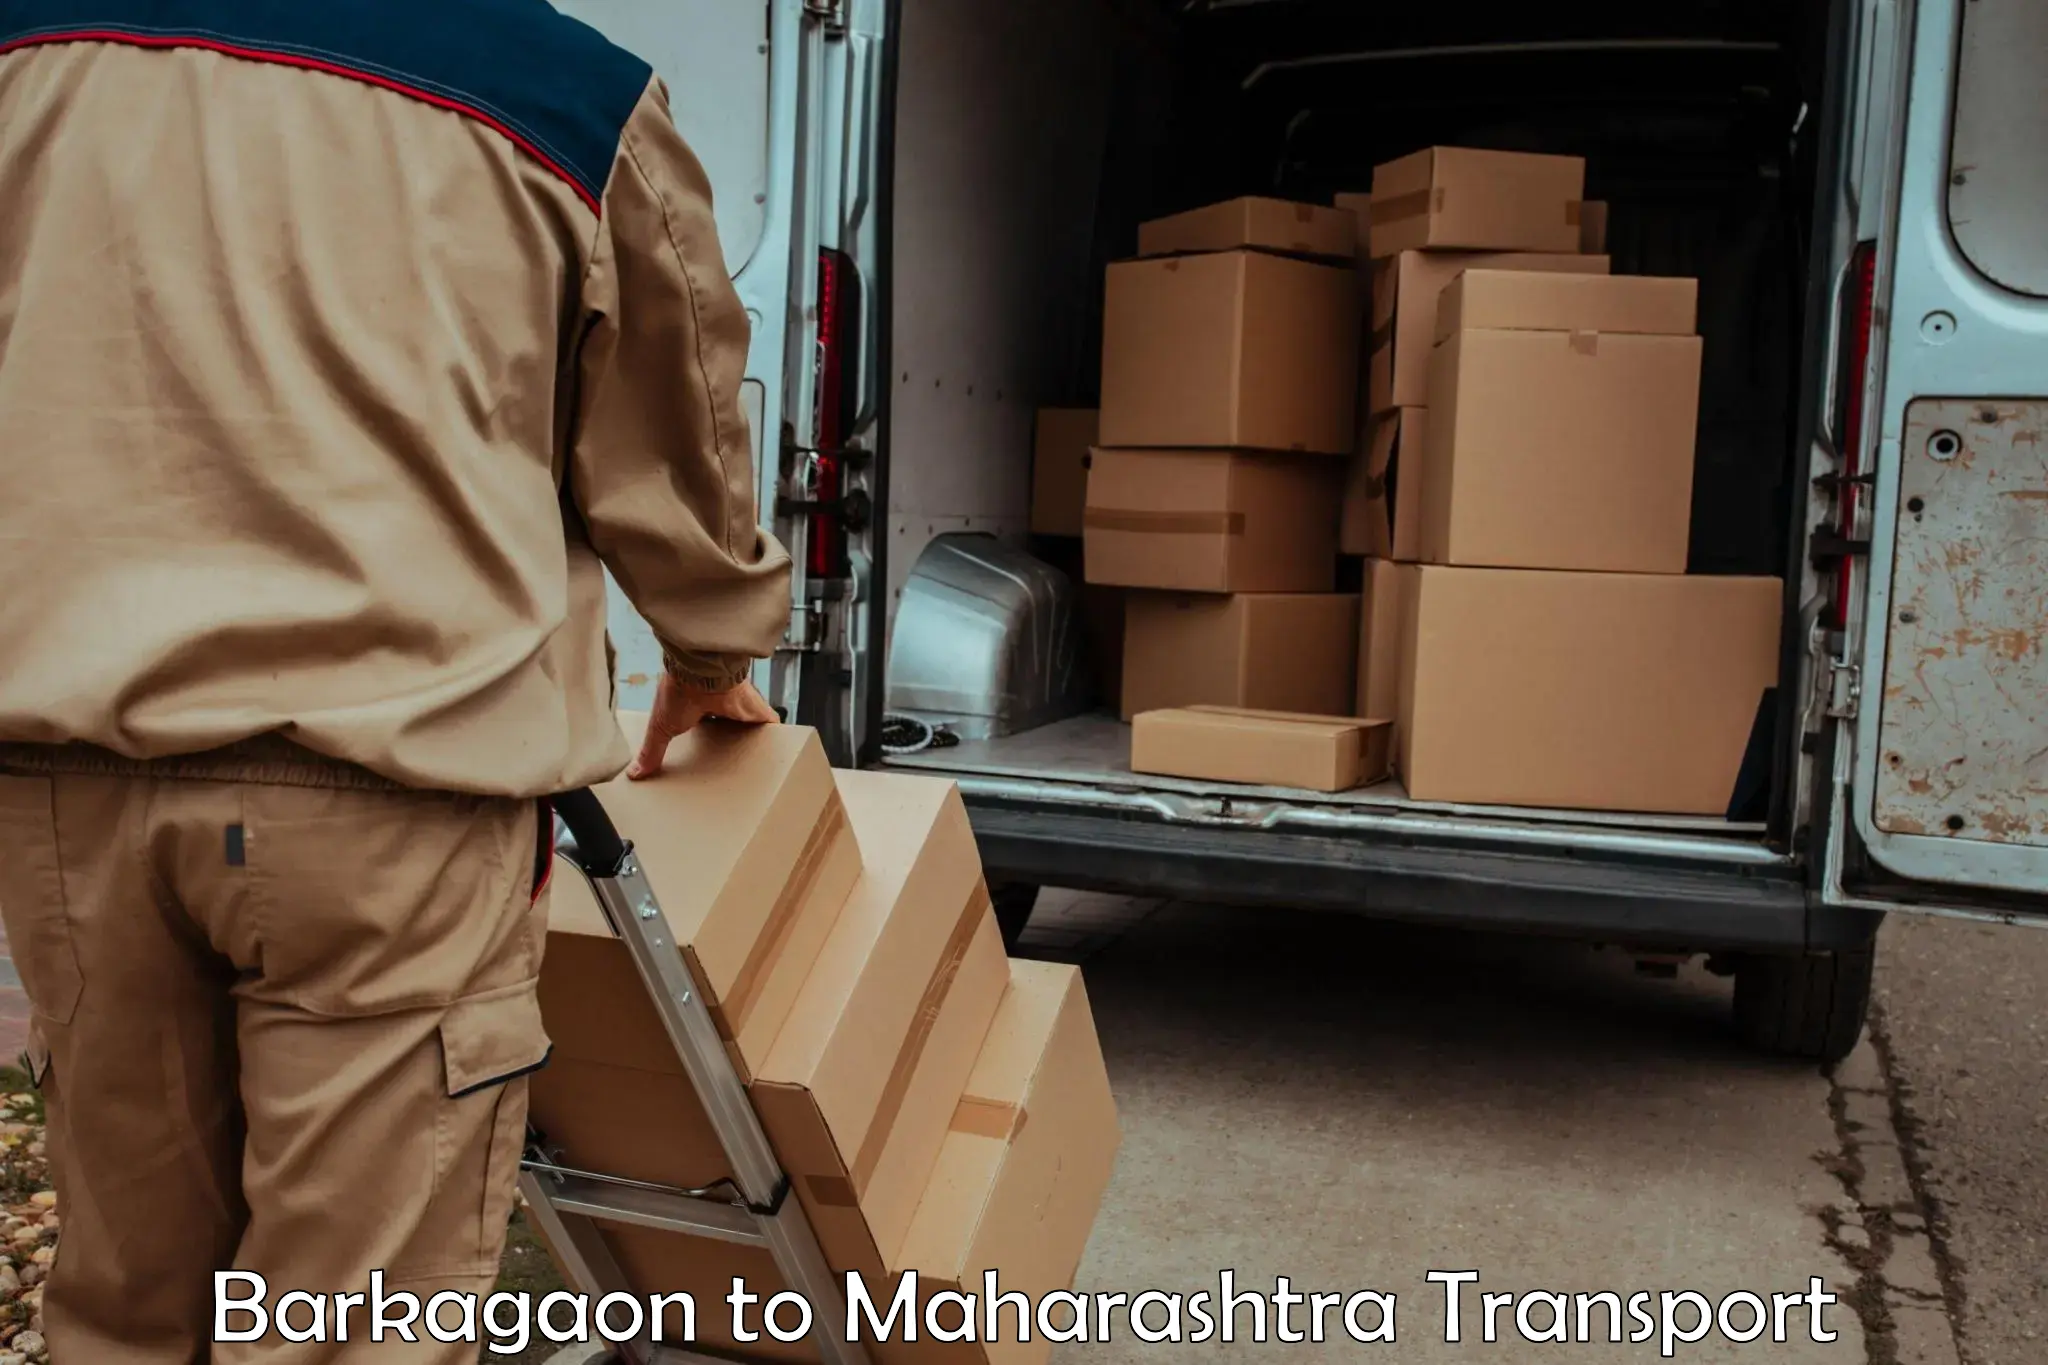 Air freight transport services in Barkagaon to Dhule